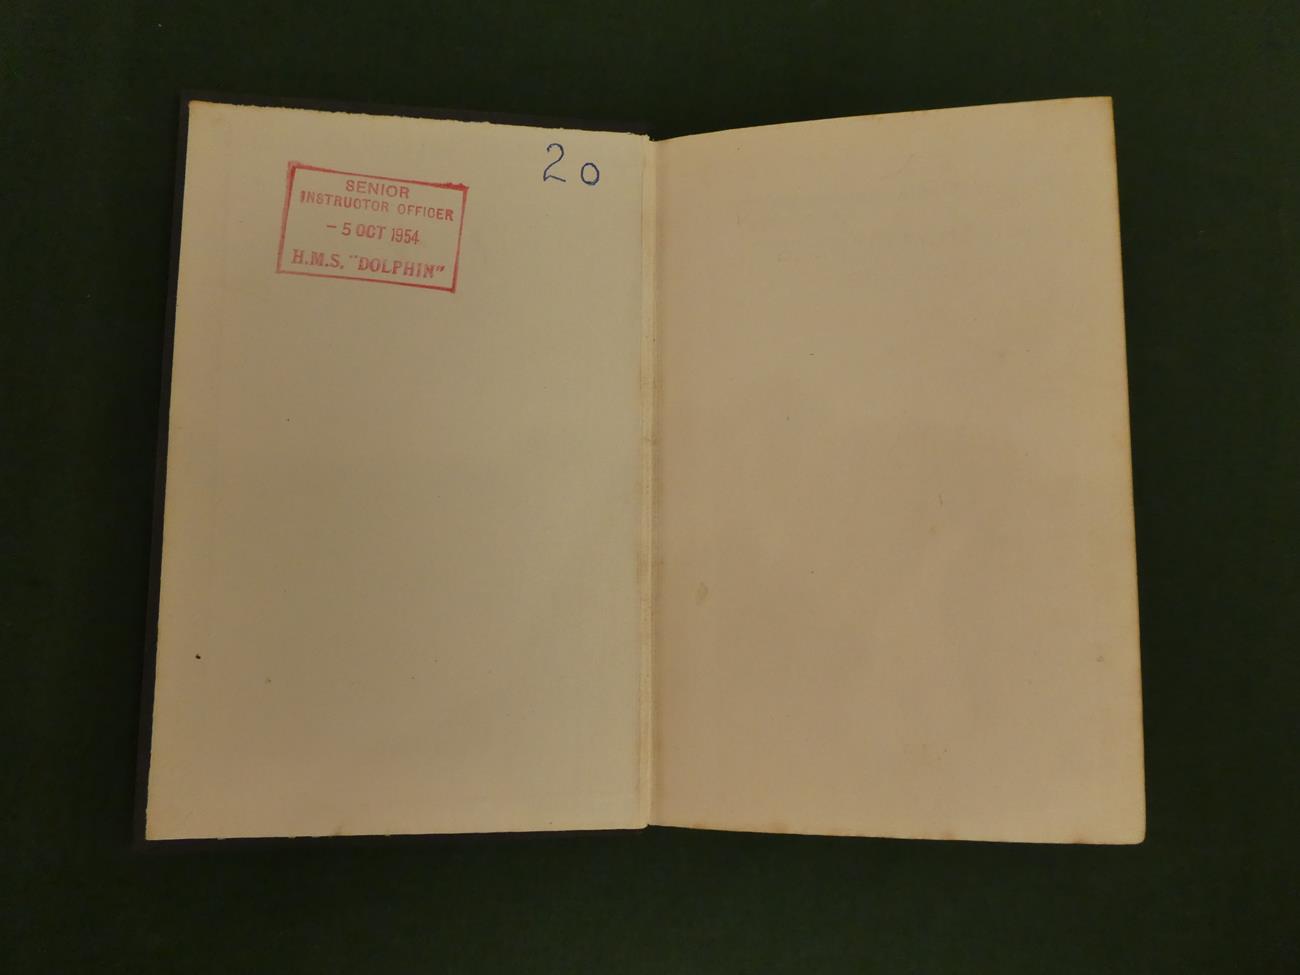 Fleming (Ian) Casino Royale, Cape, 1953, first edition, H.M.S Dolphin stamp and ink number to - Image 6 of 8